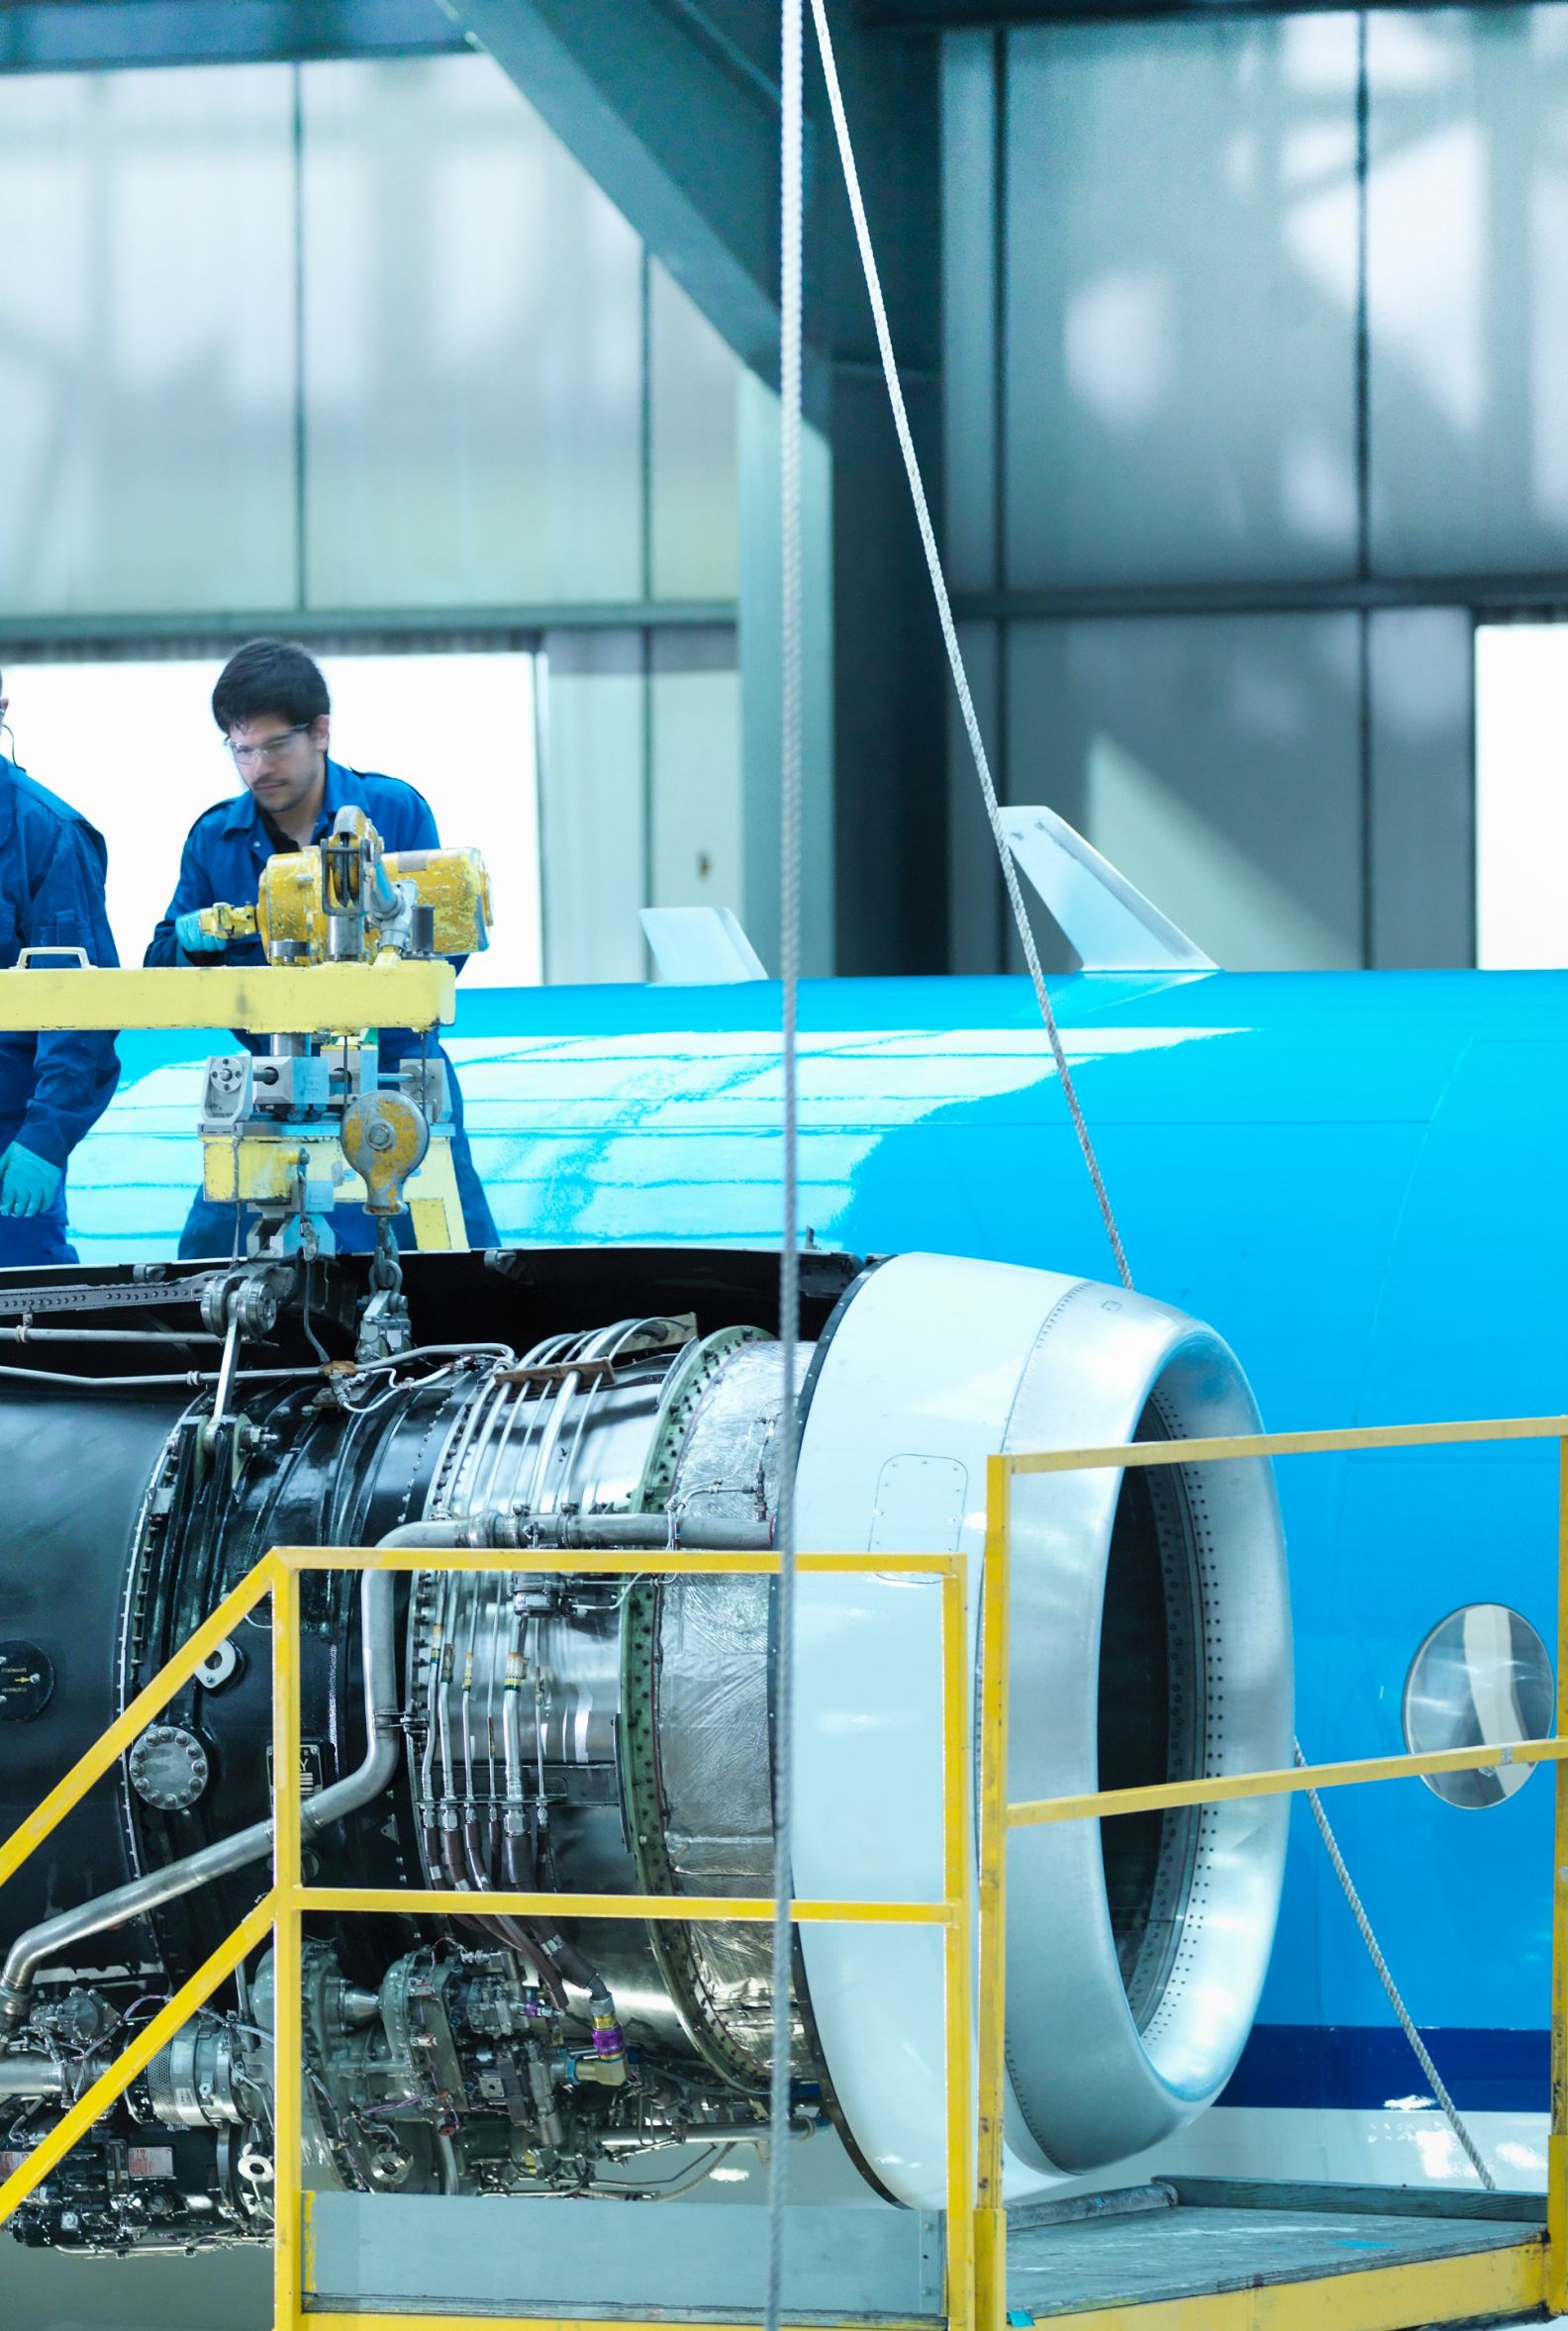 Workers examining an engine